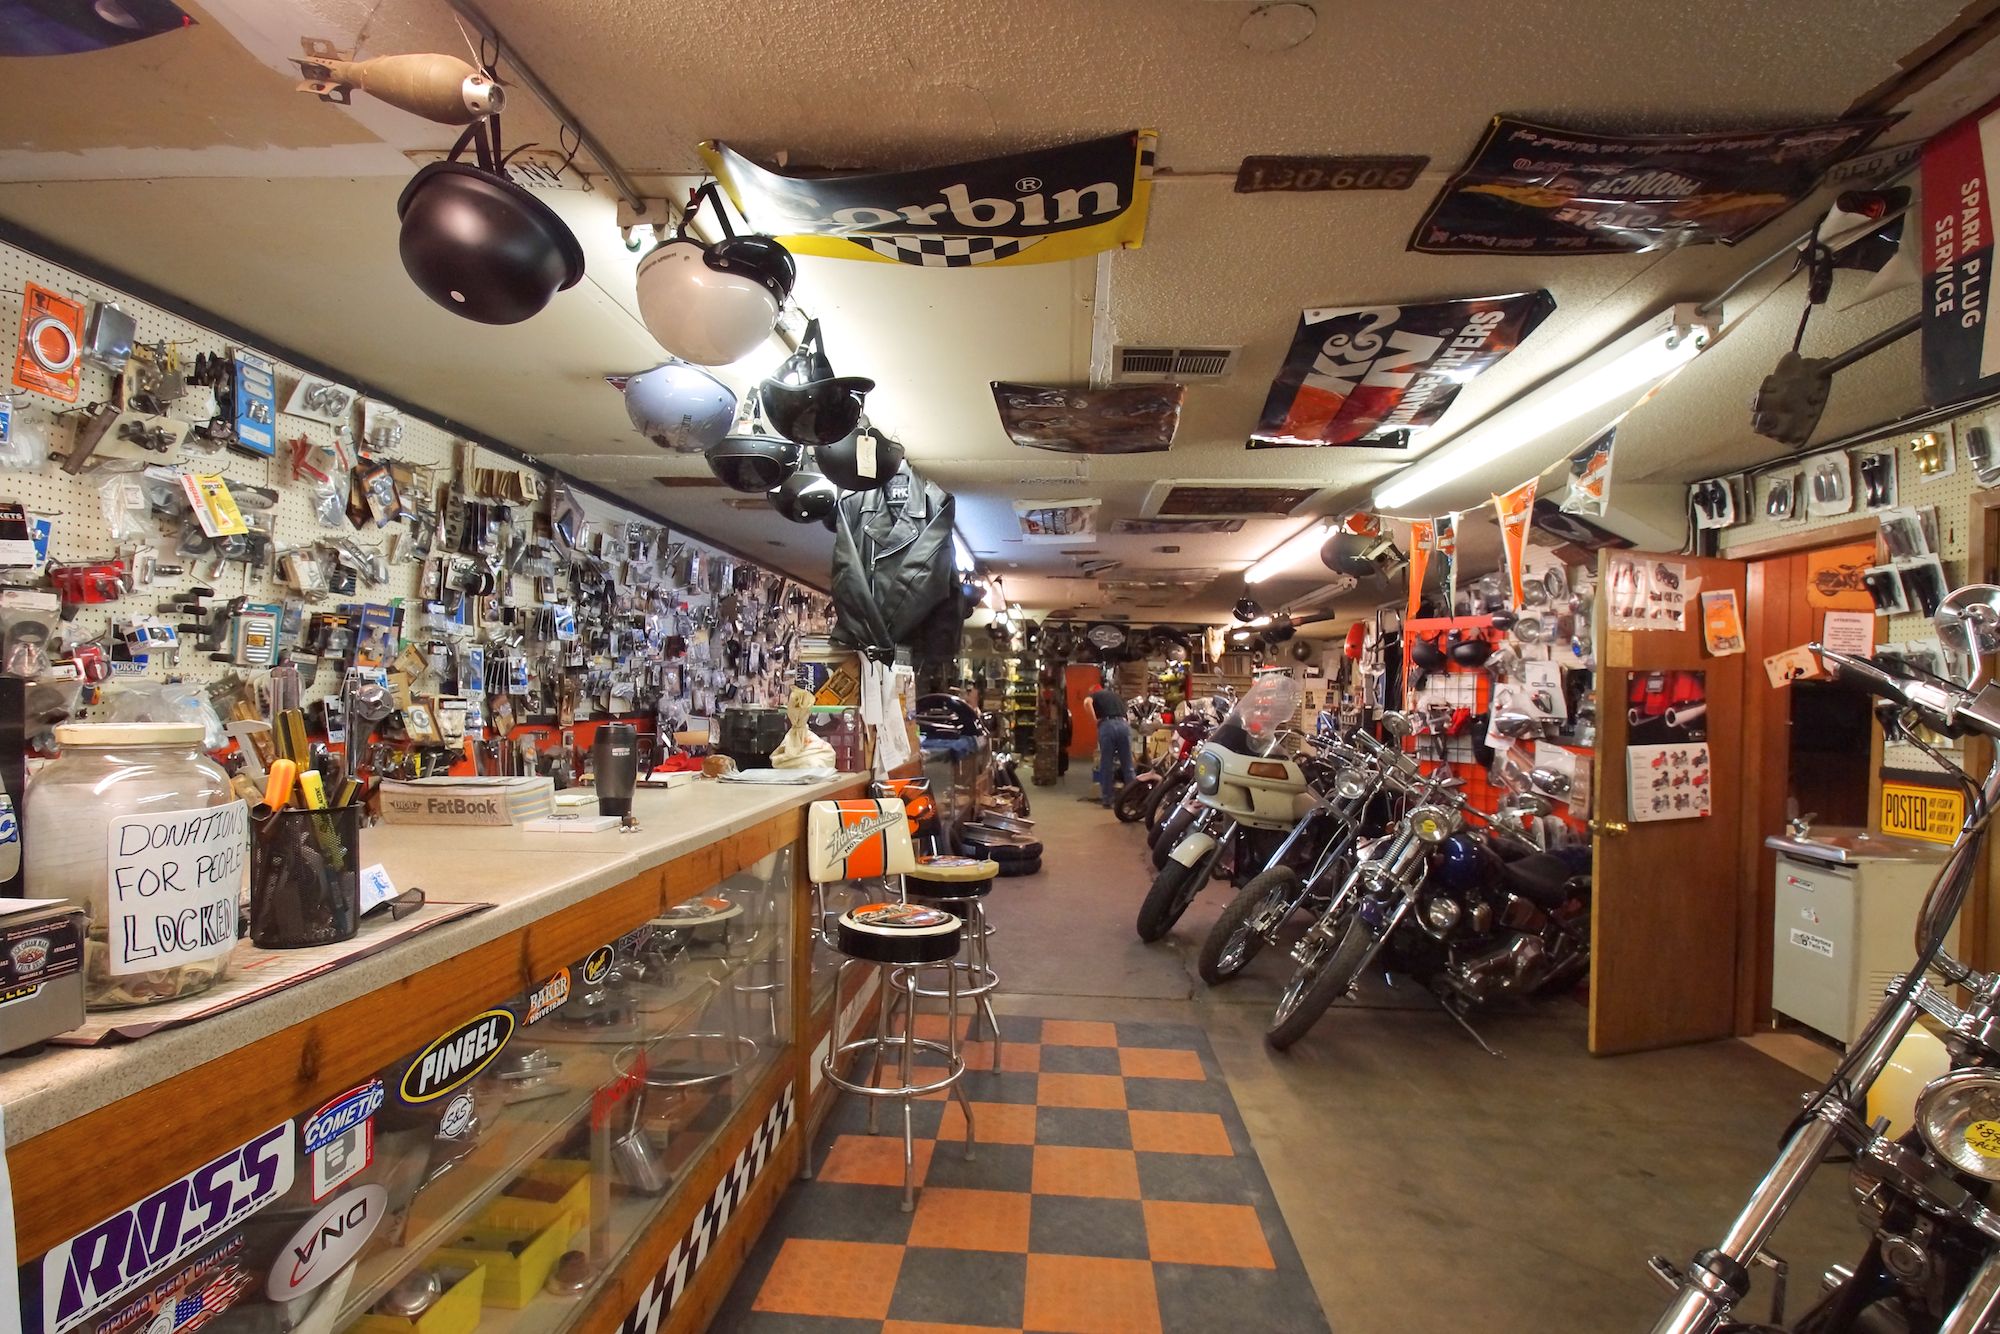 We are off to Bud's Motorcycle Shop for a Part | Tom Zimmer - PhotoBubba